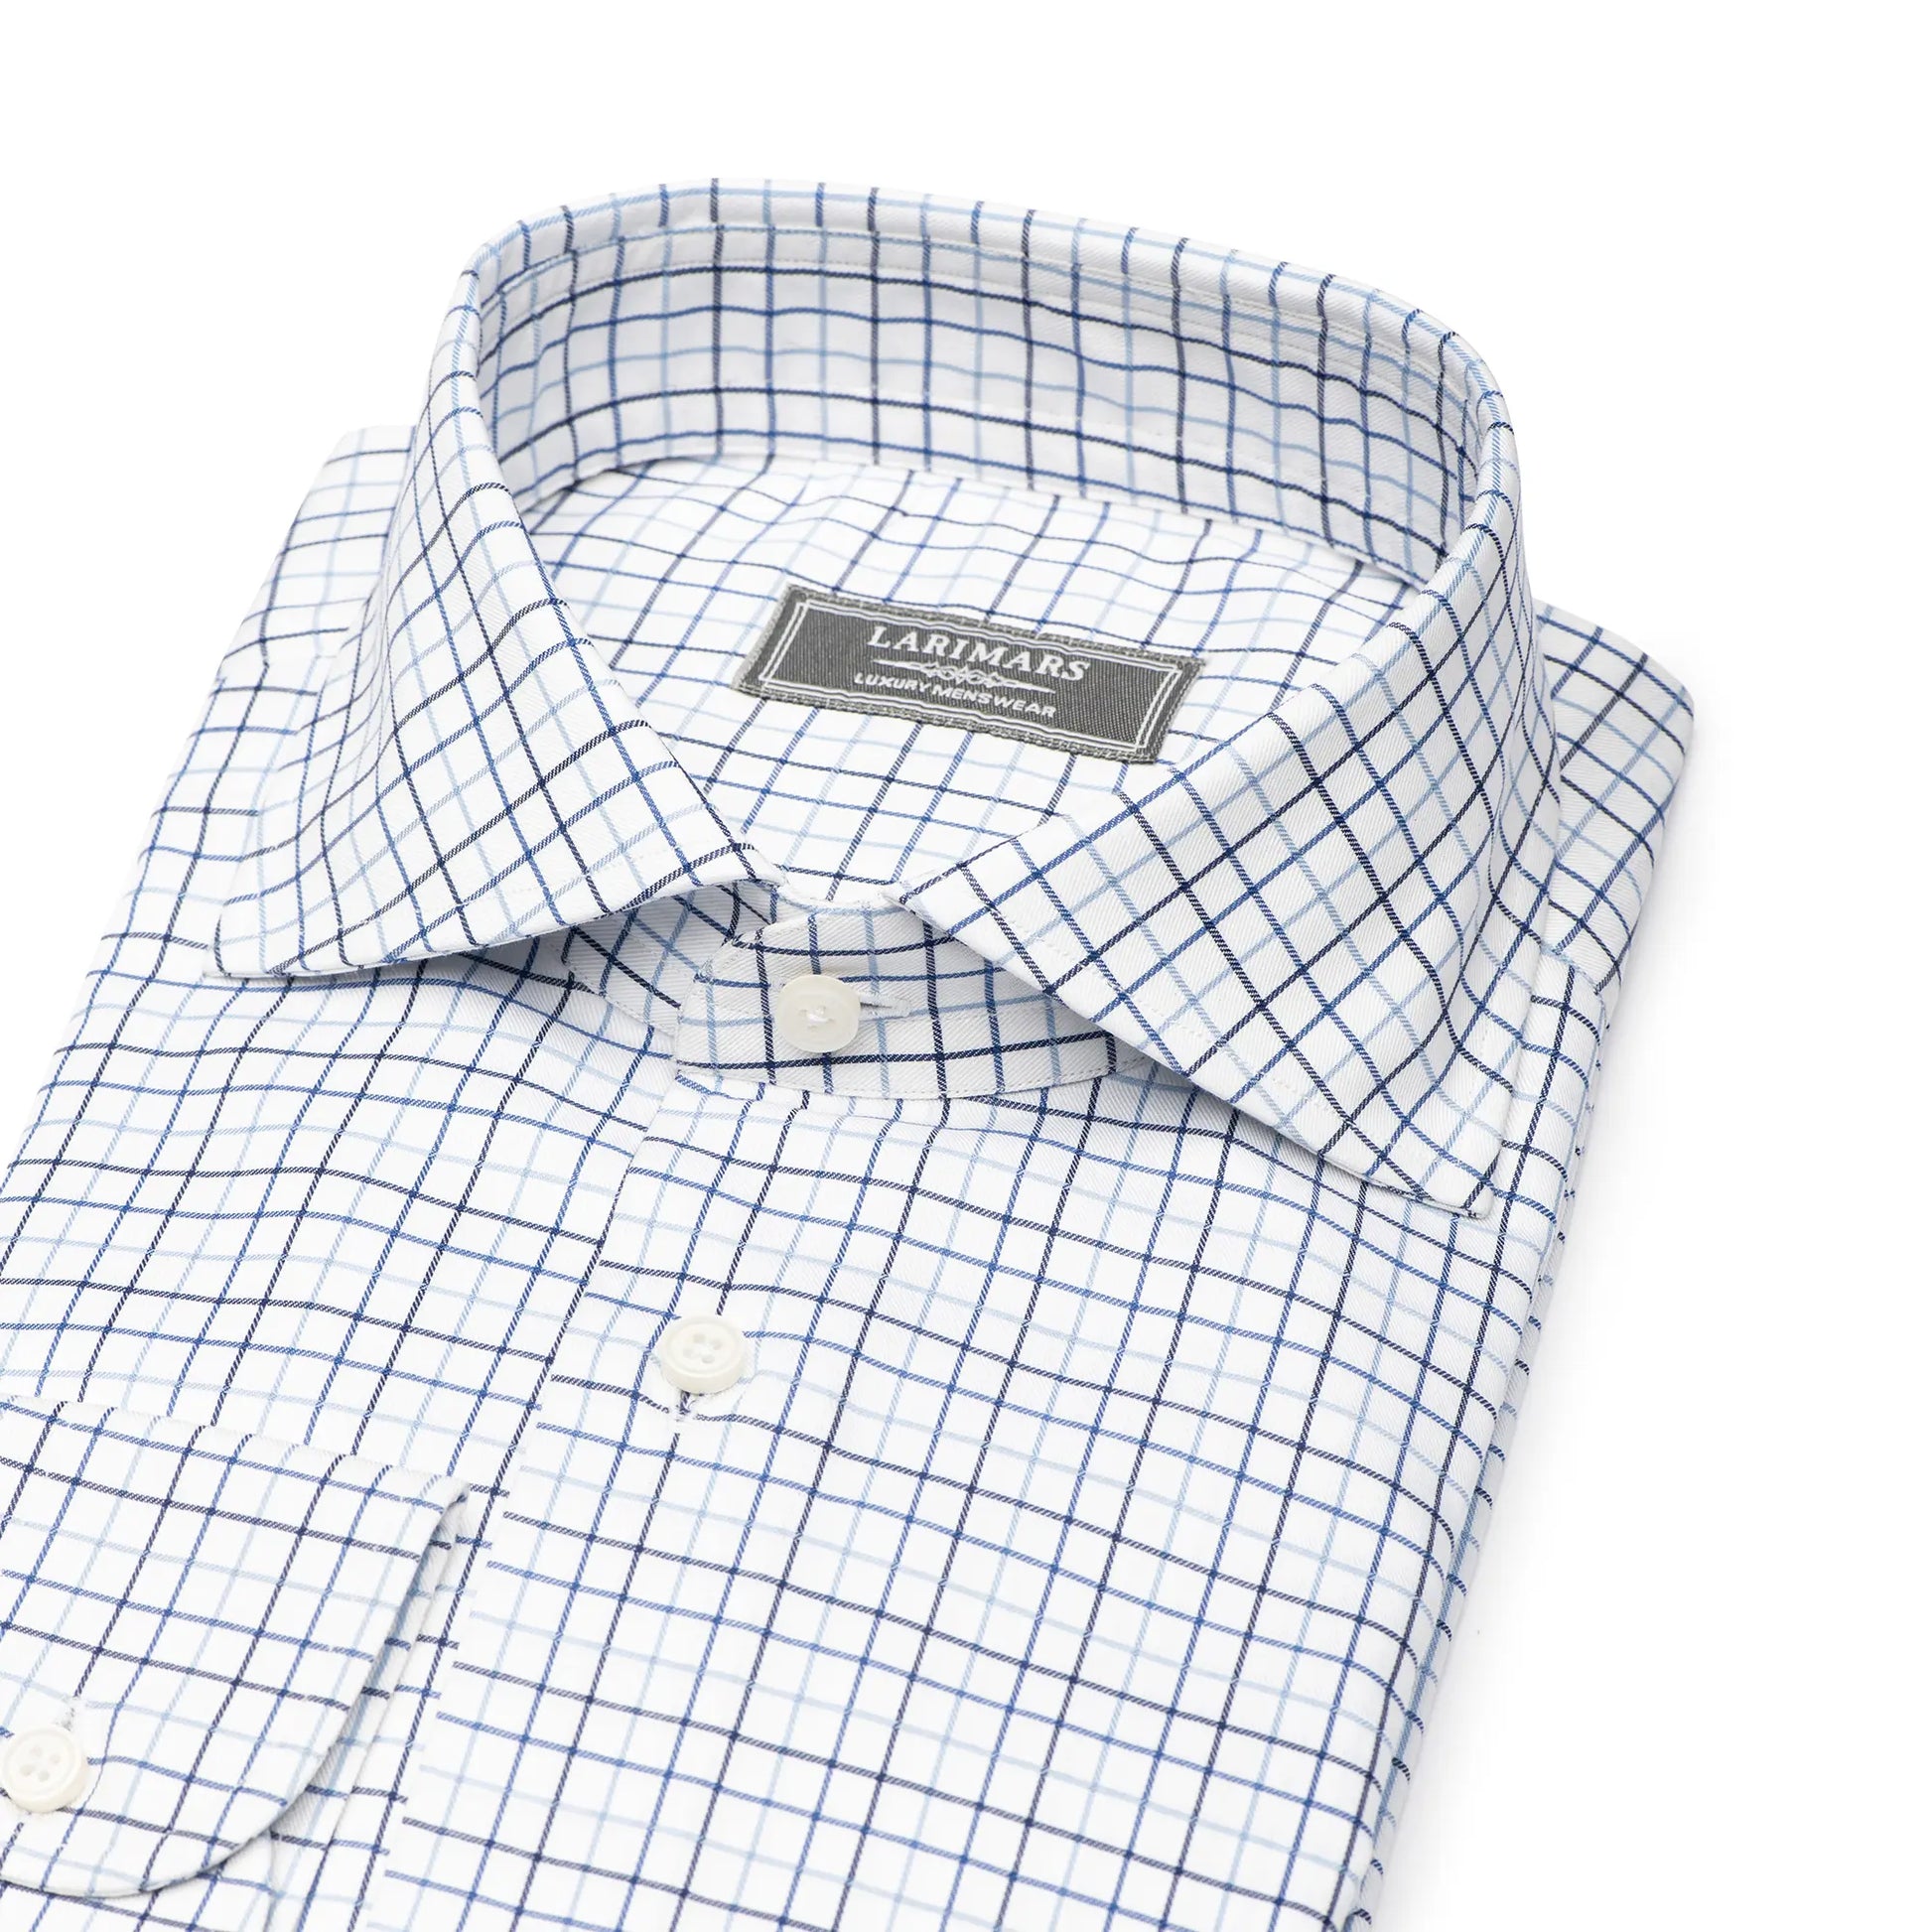 Blue Tattersall - Larimars Clothing Men's Formal and casual wear shirts